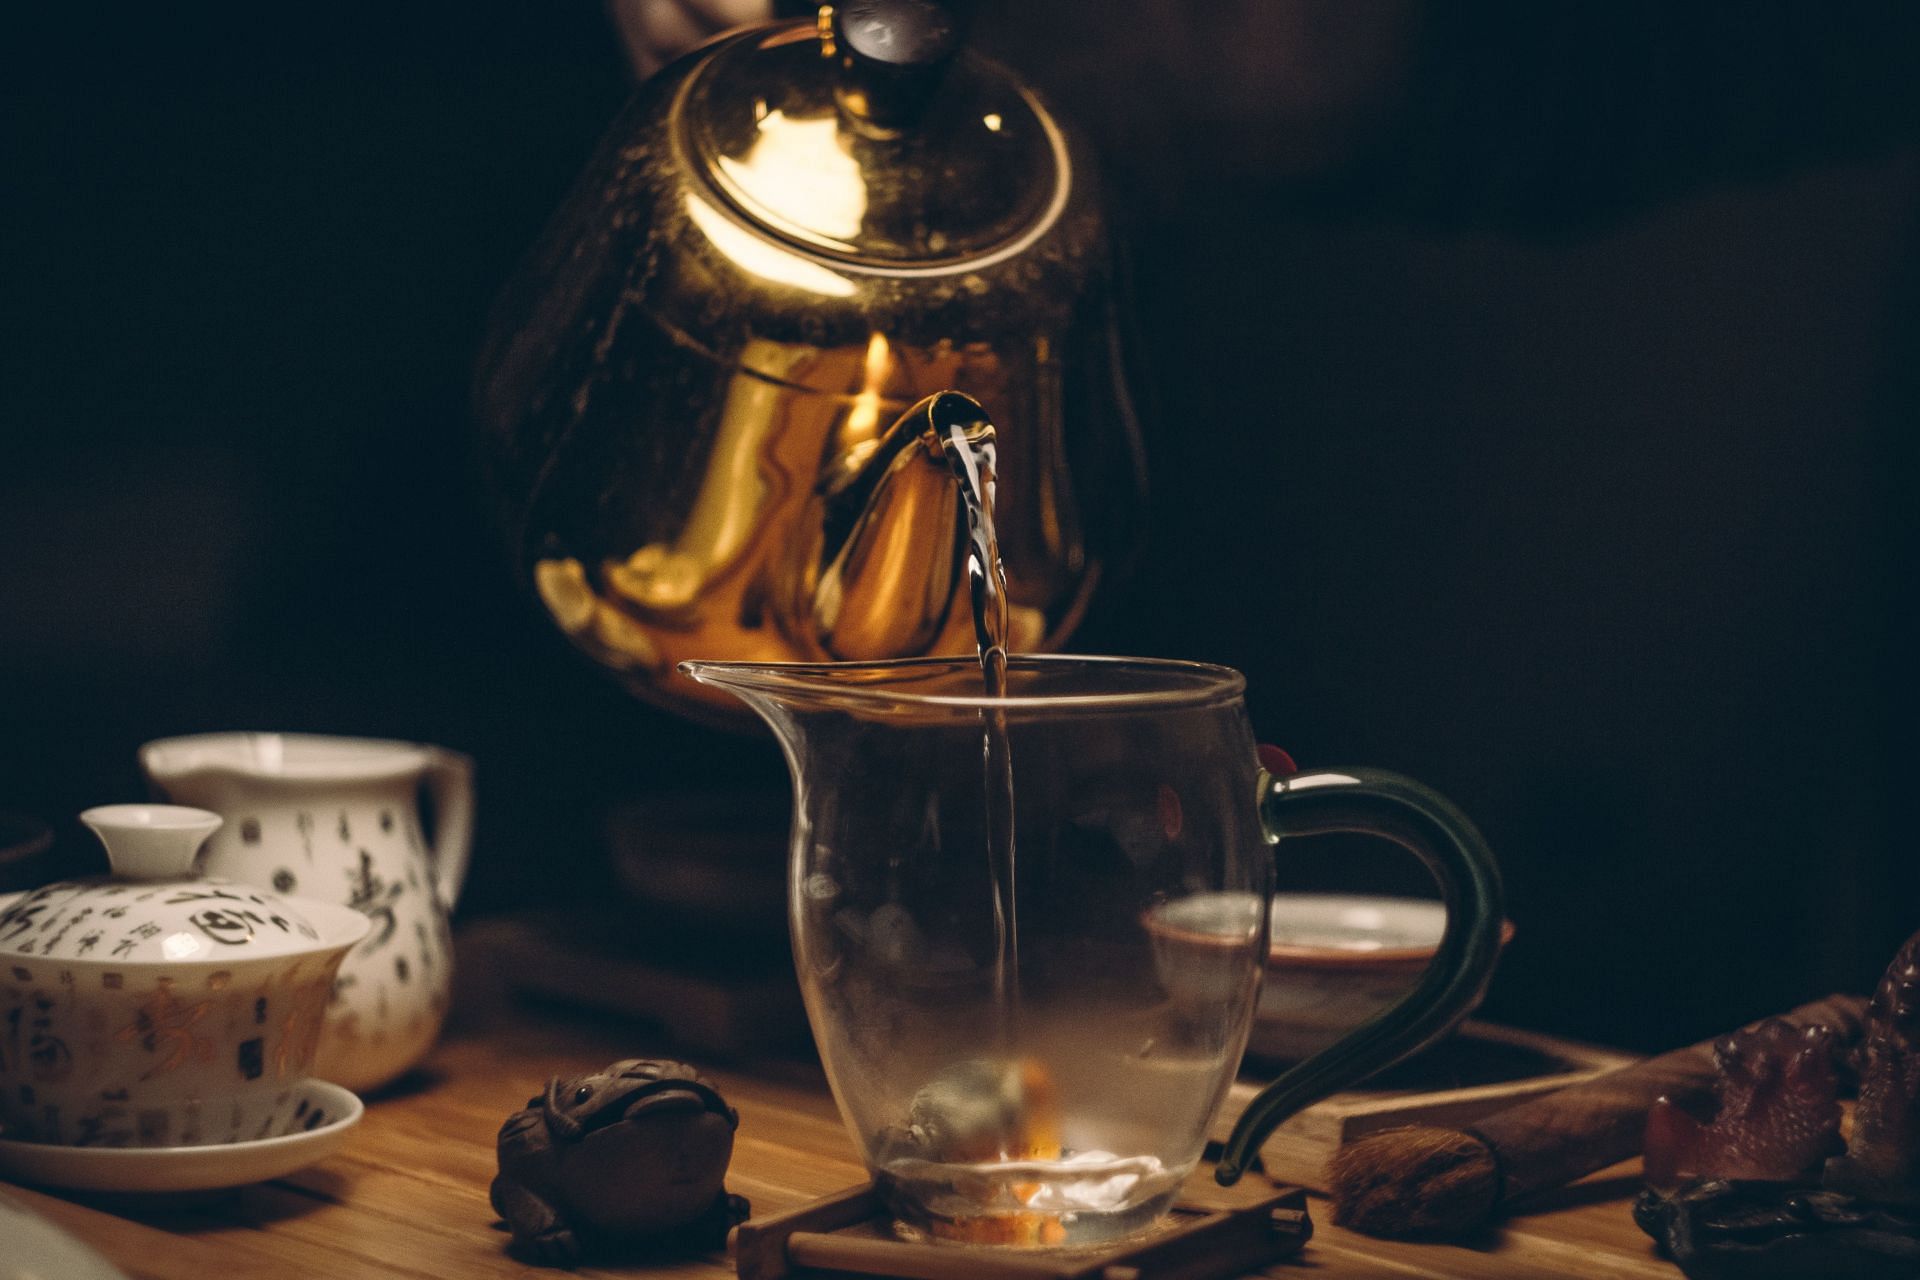 Sipping hot water can help you get relief from constipation. (Image via Pexels/ Nikolay Osmachko)